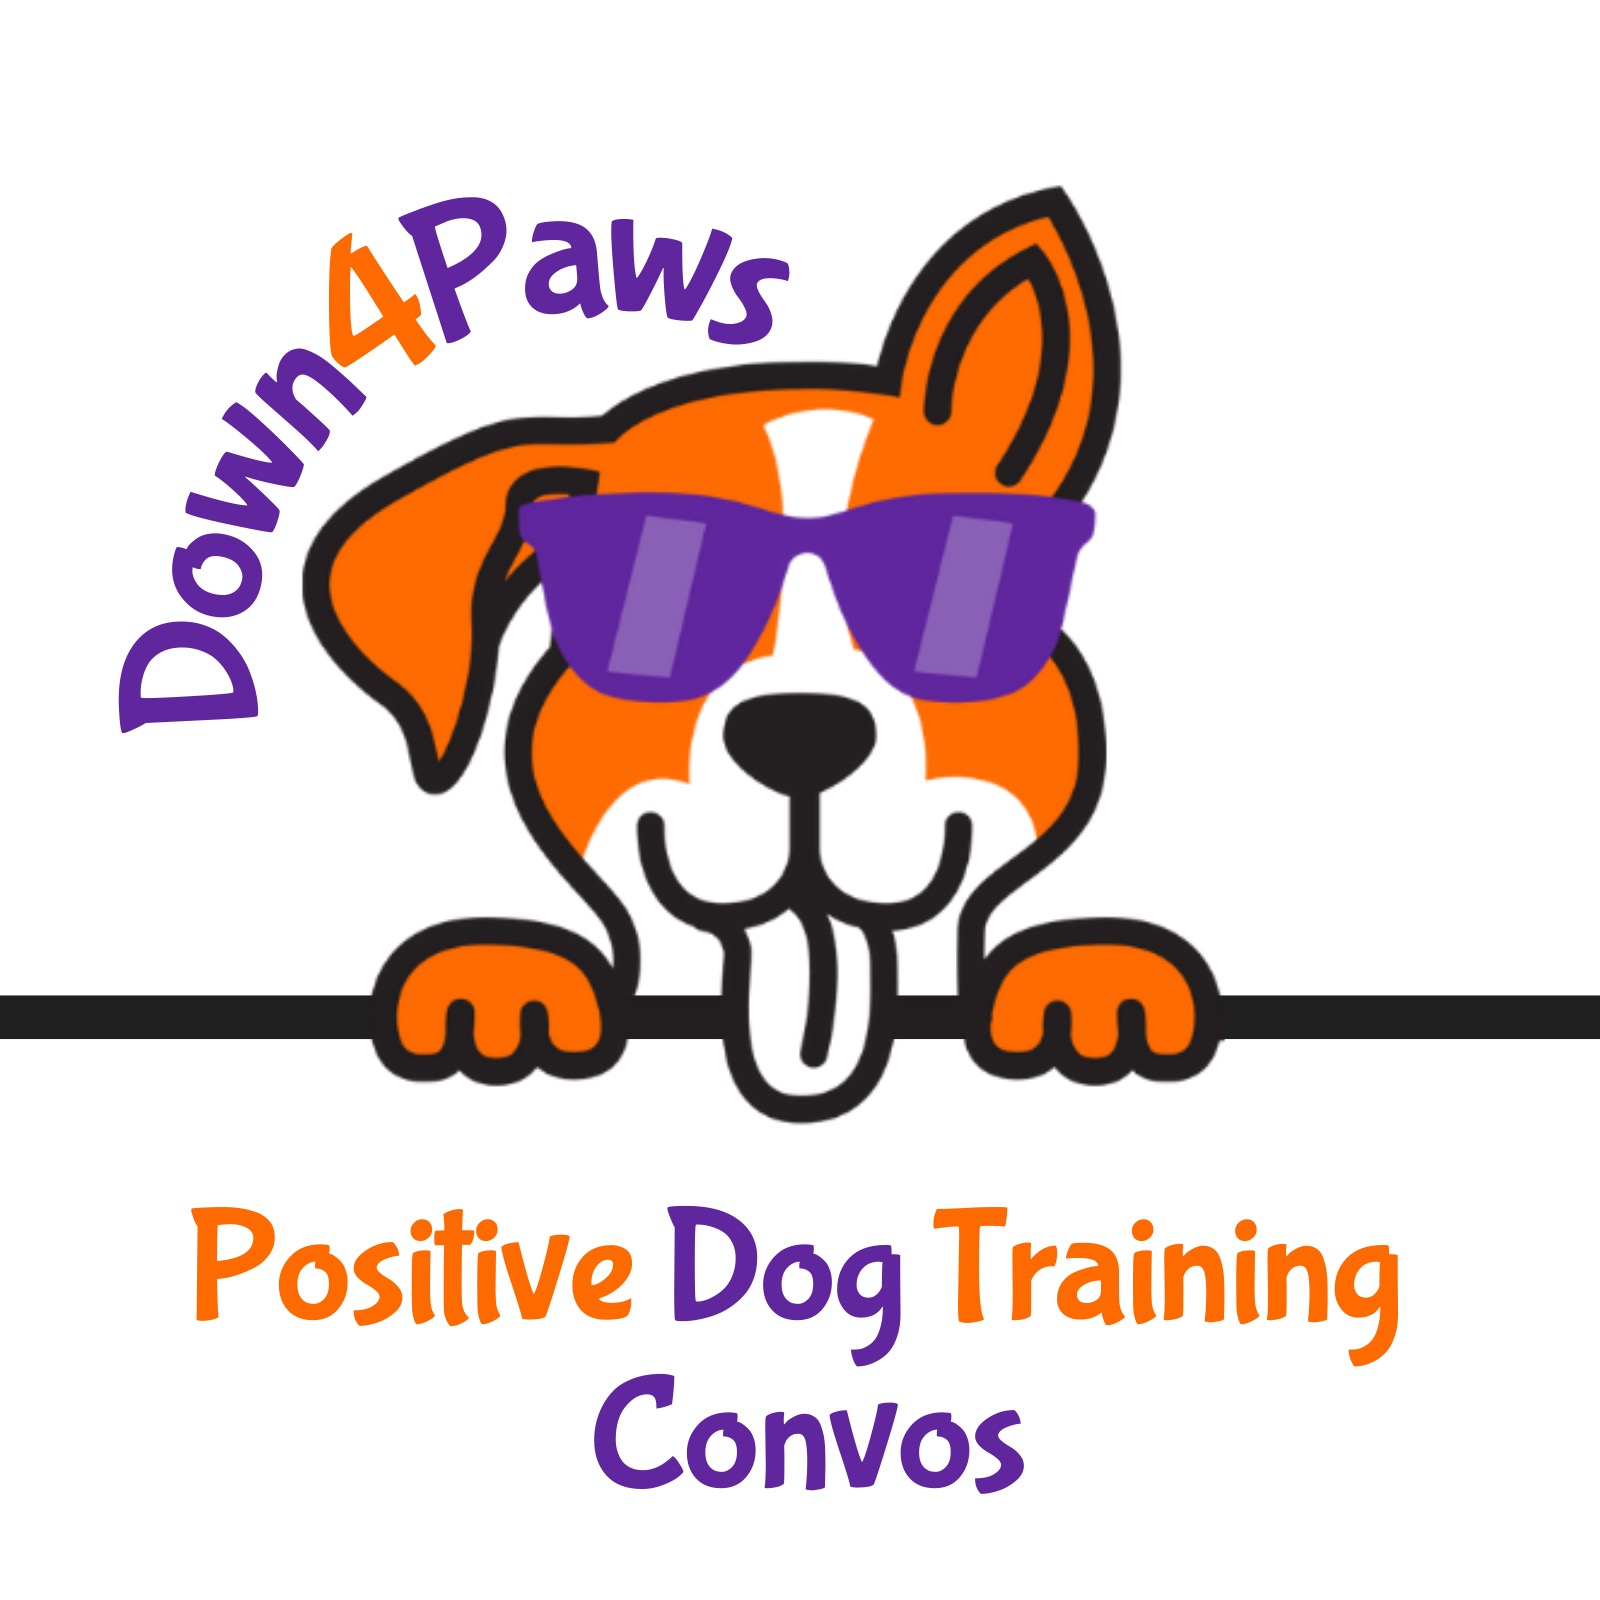 Down 4 Paws: Positive Dog Training Convos